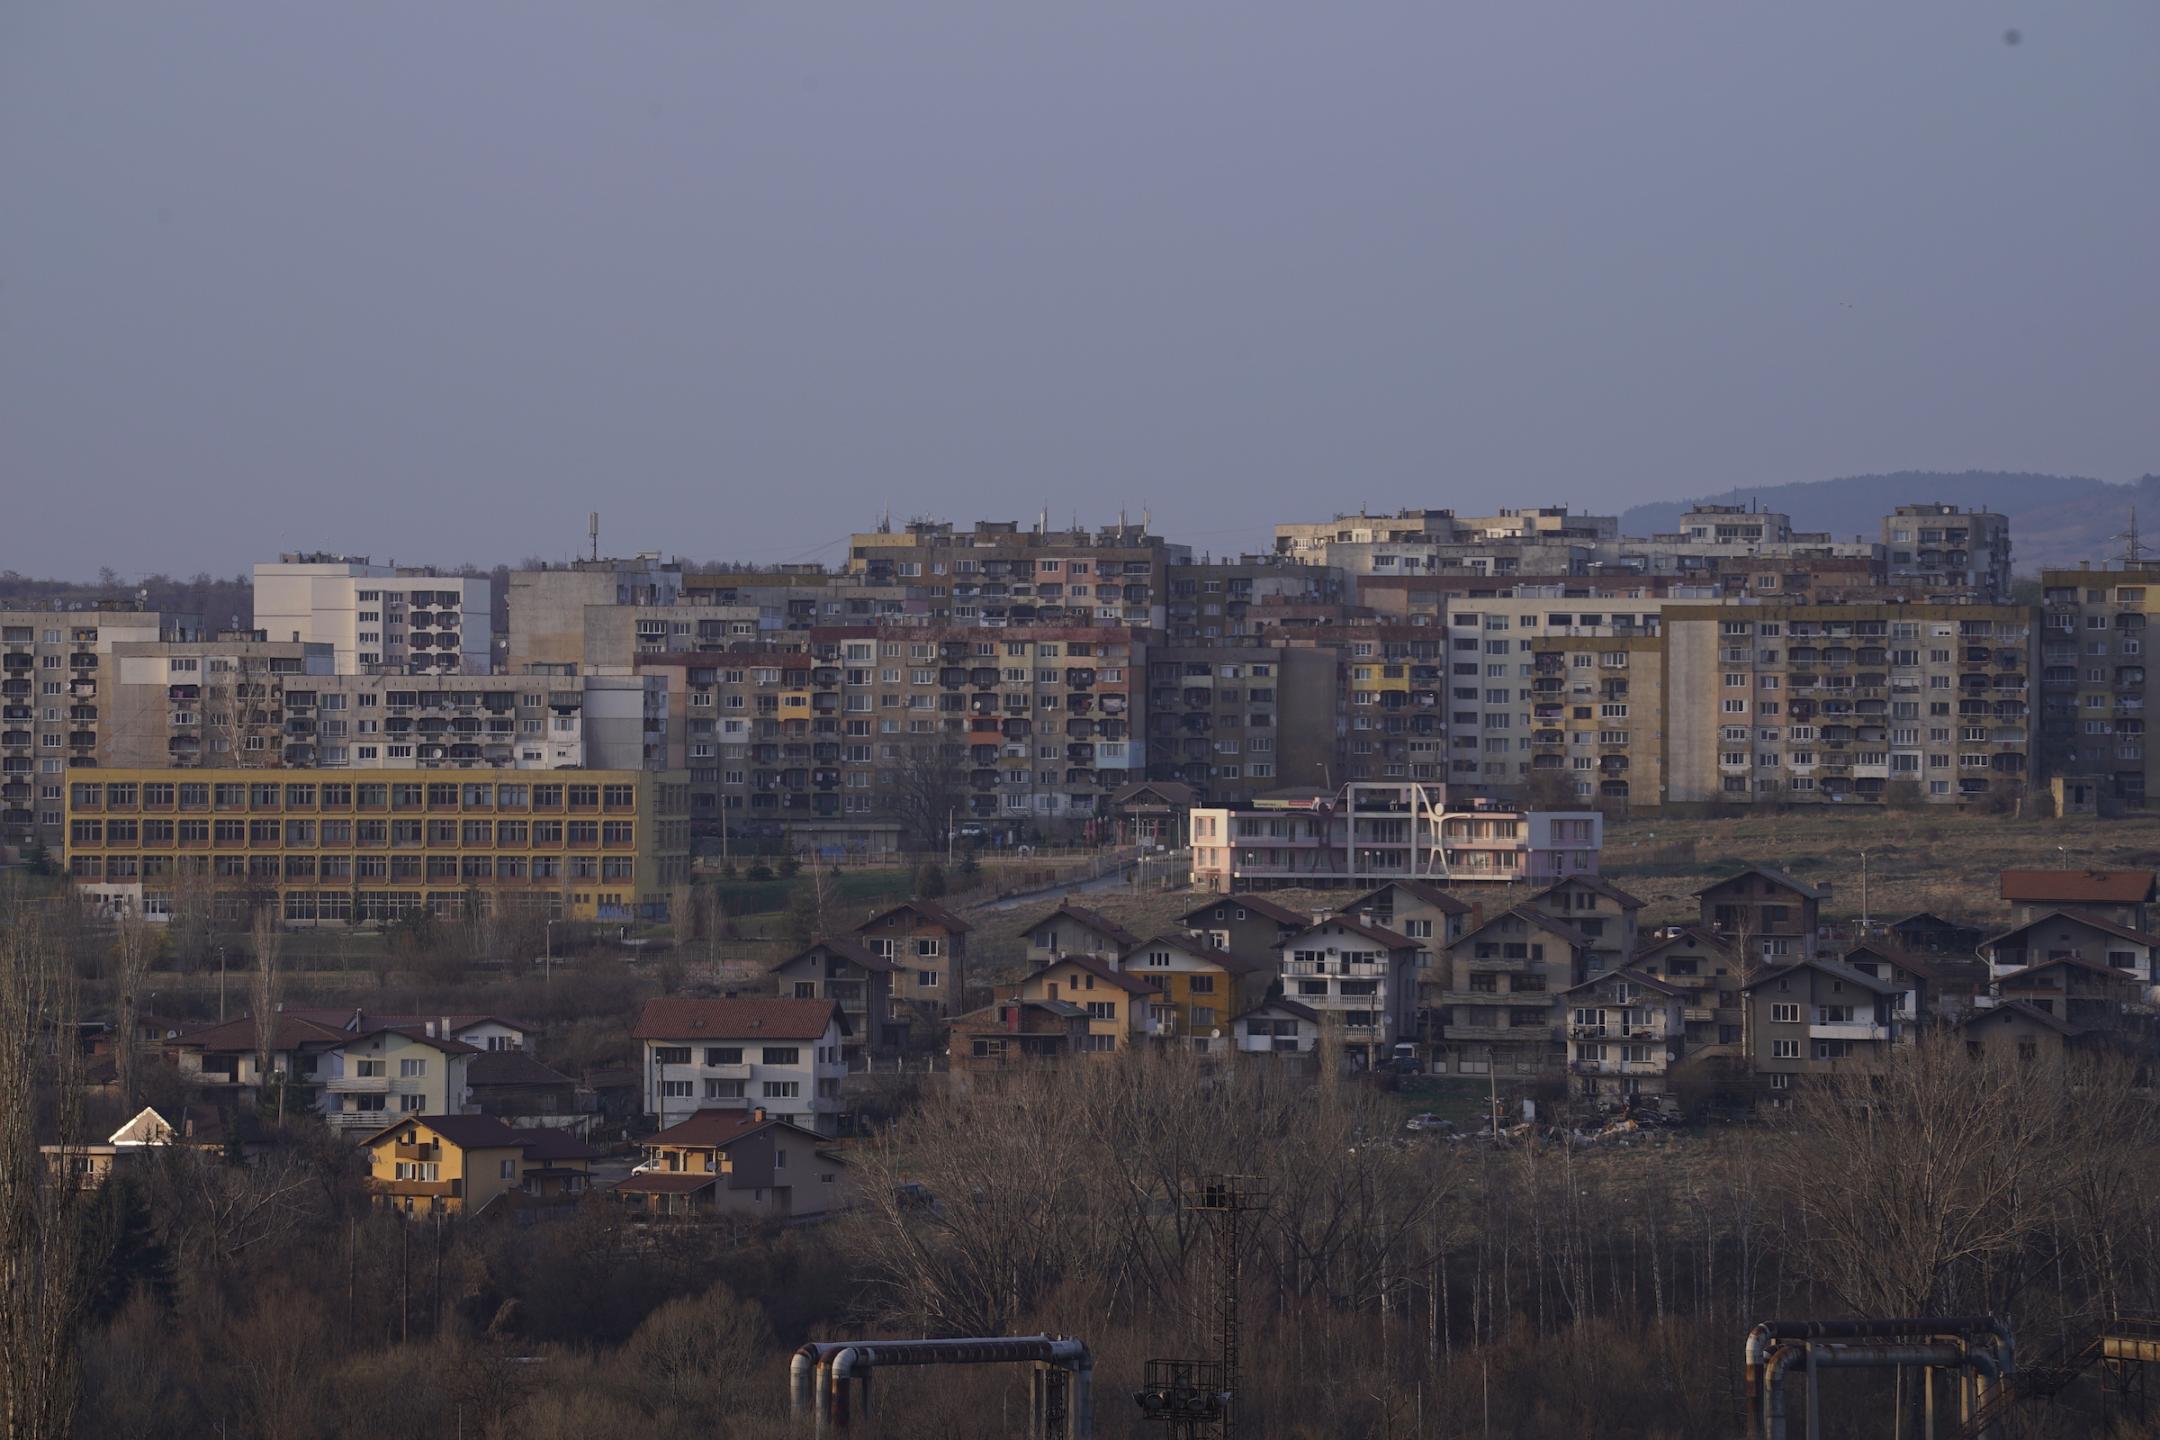 Panorama shoot of the skyline of a small town in Bulgaria during daytime.